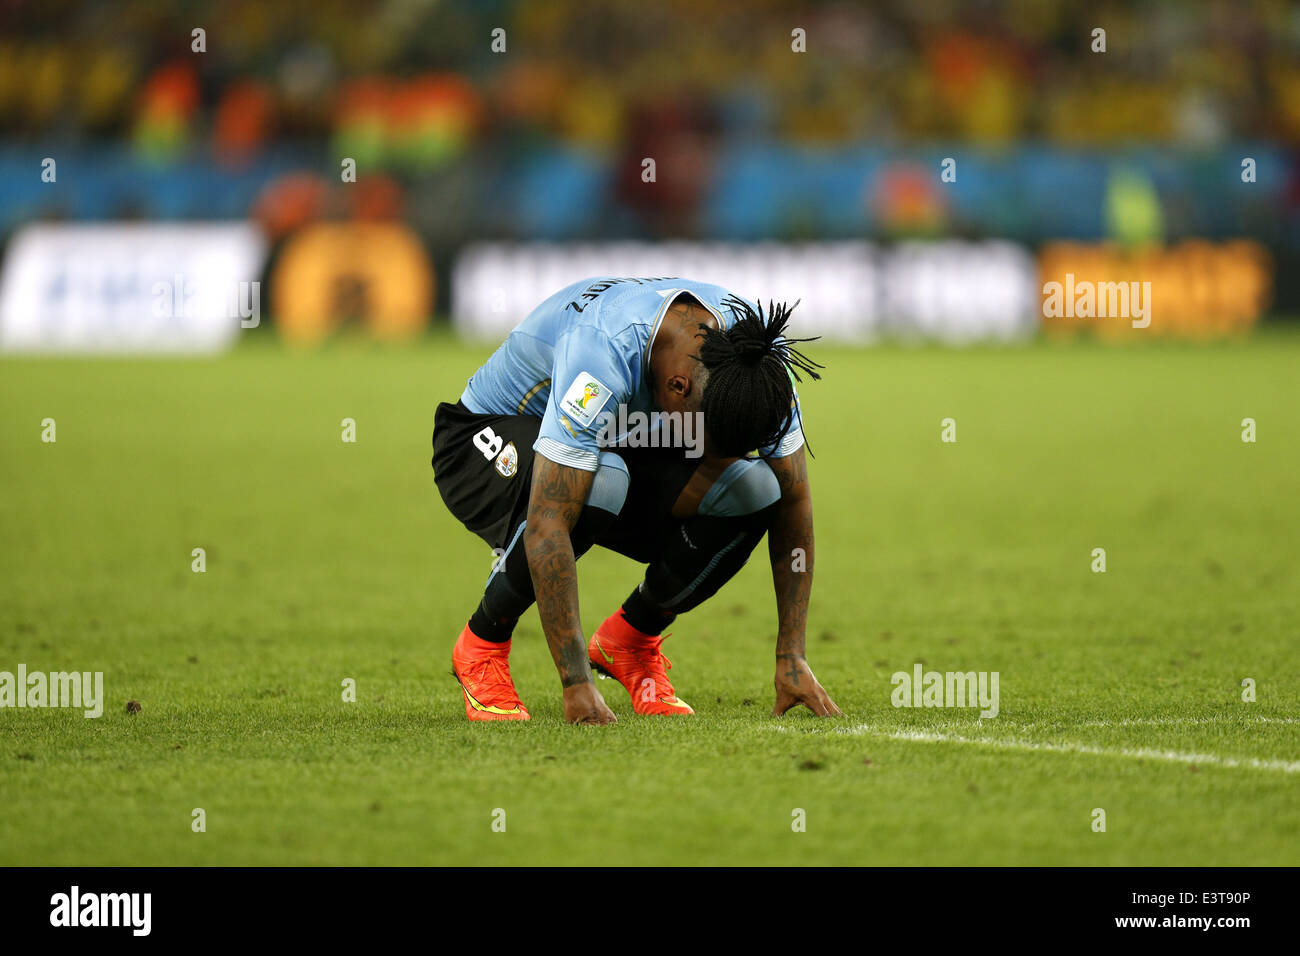 Rio De Janeiro, Brazil. 28th June, 2014. Uruguay's Abel Hernandez reacts after a Round of 16 match between Colombia and Uruguay of 2014 FIFA World Cup at the Estadio do Maracana Stadium in Rio de Janeiro, Brazil, on June 28, 2014. Colombia won 2-0 over Uruguay and qualified for Quarter-finals on Saturday. Credit:  Wang Lili/Xinhua/Alamy Live News Stock Photo